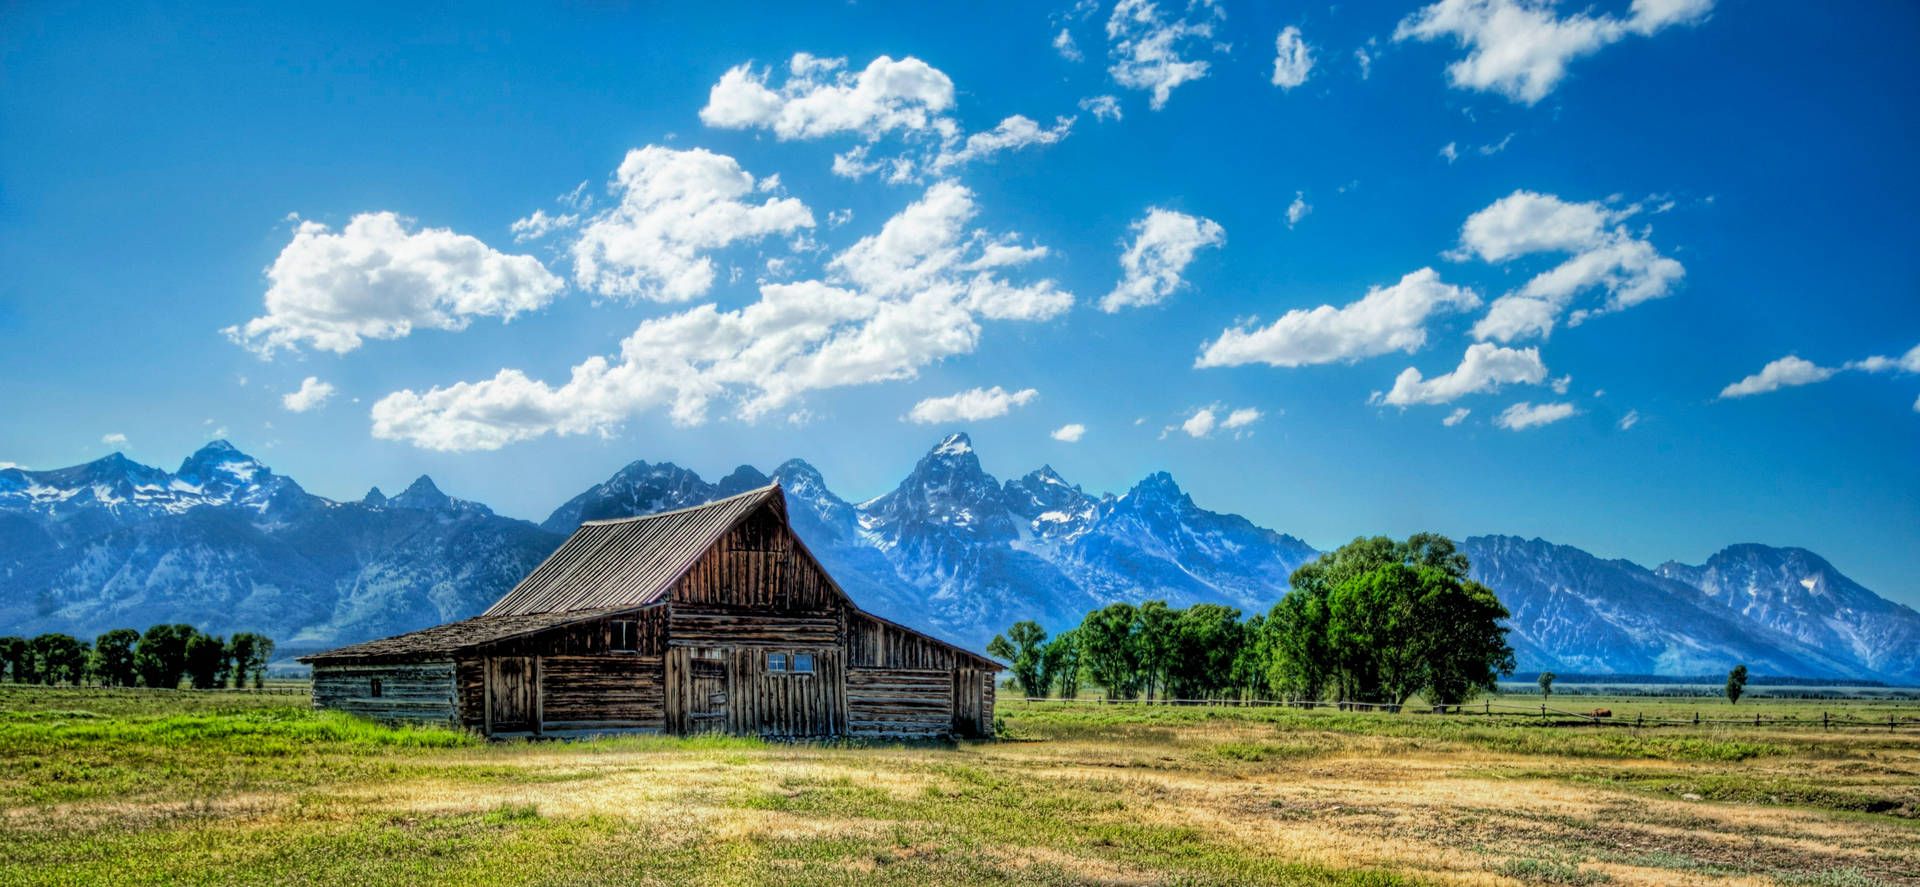 Country Summer Wood Cabin Mountains Wallpaper